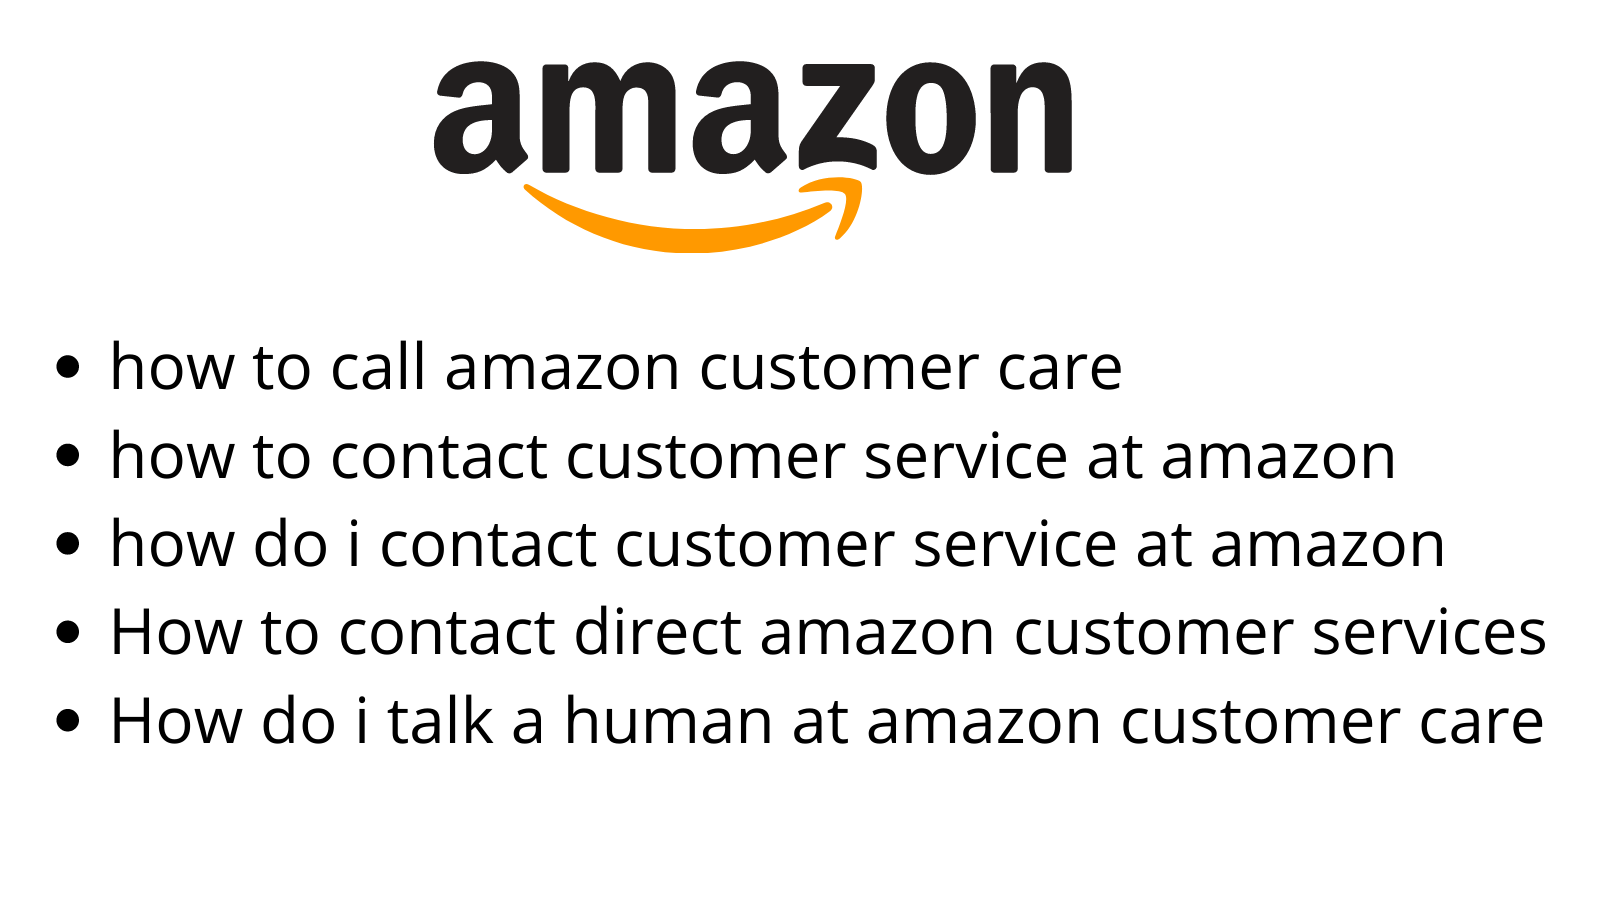 How to contact customer service at amazon image